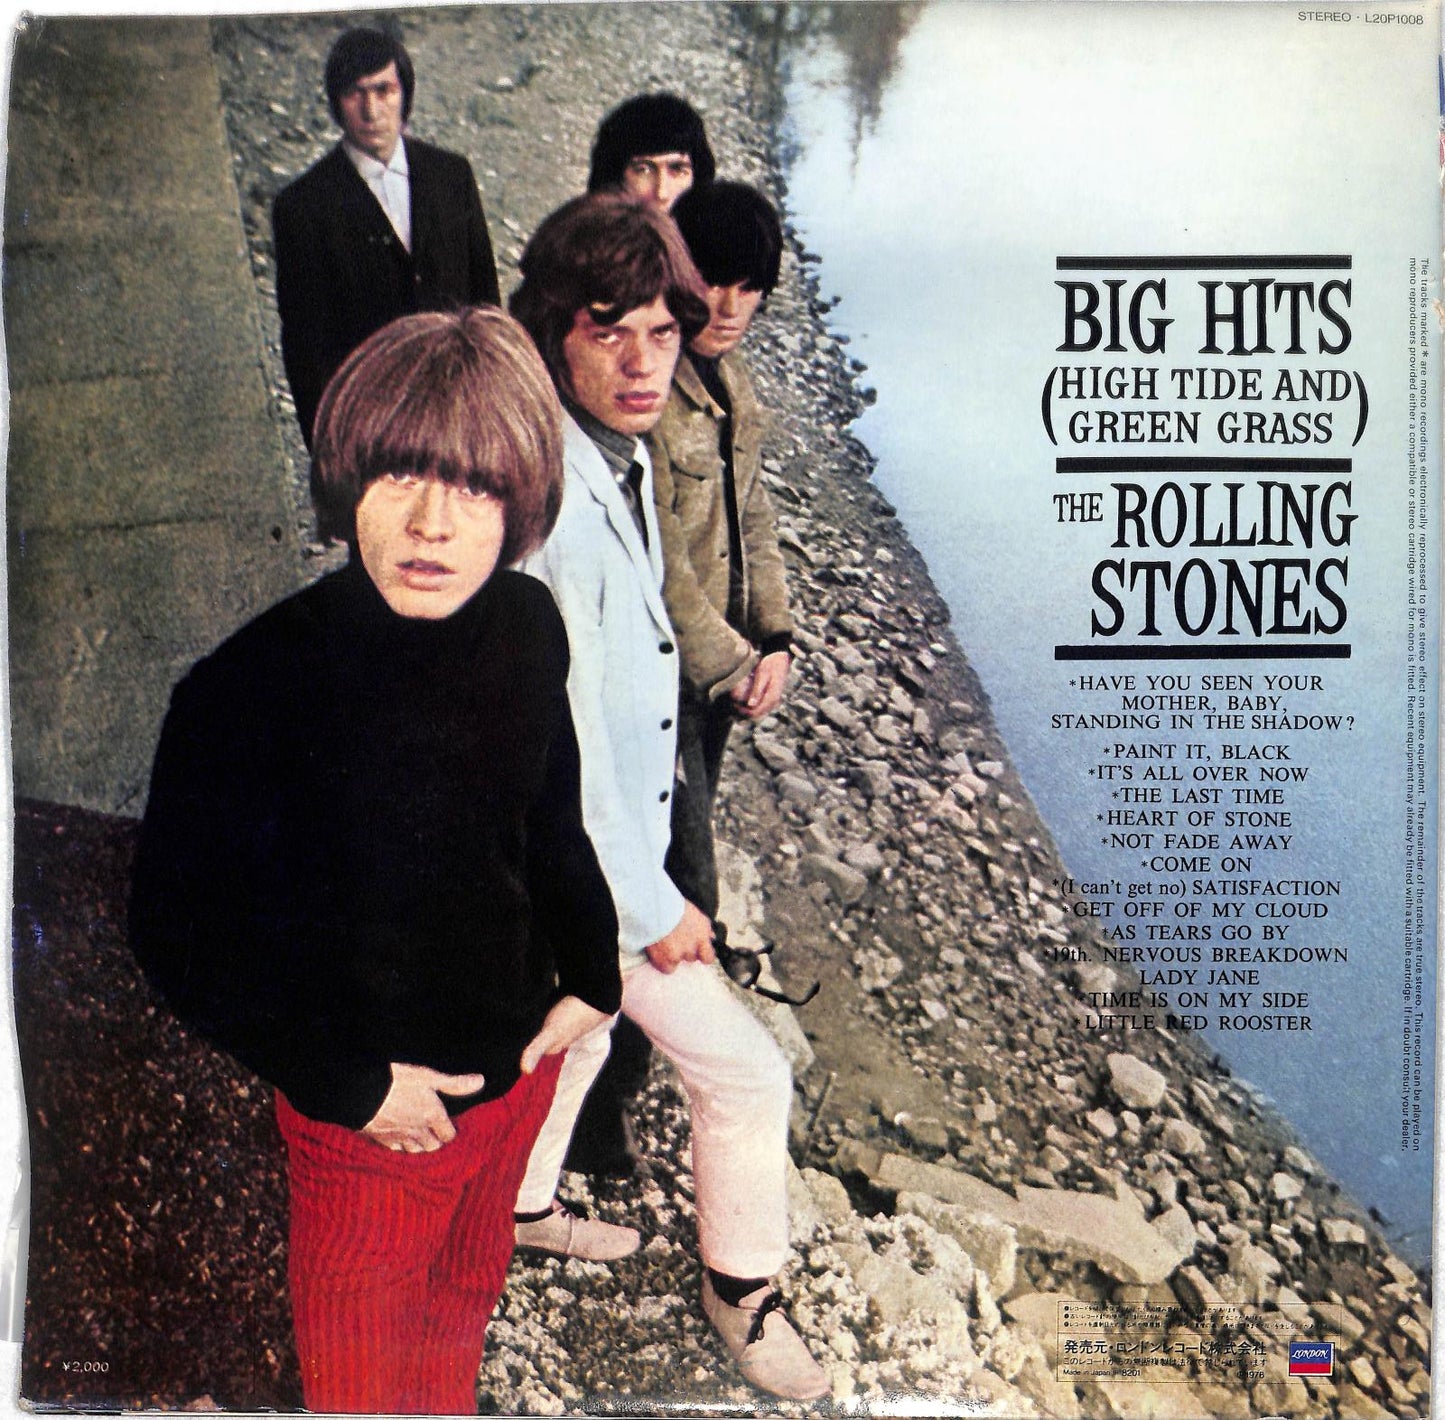 THE ROLLING STONES - Big Hits (High Tide And Green Grass)